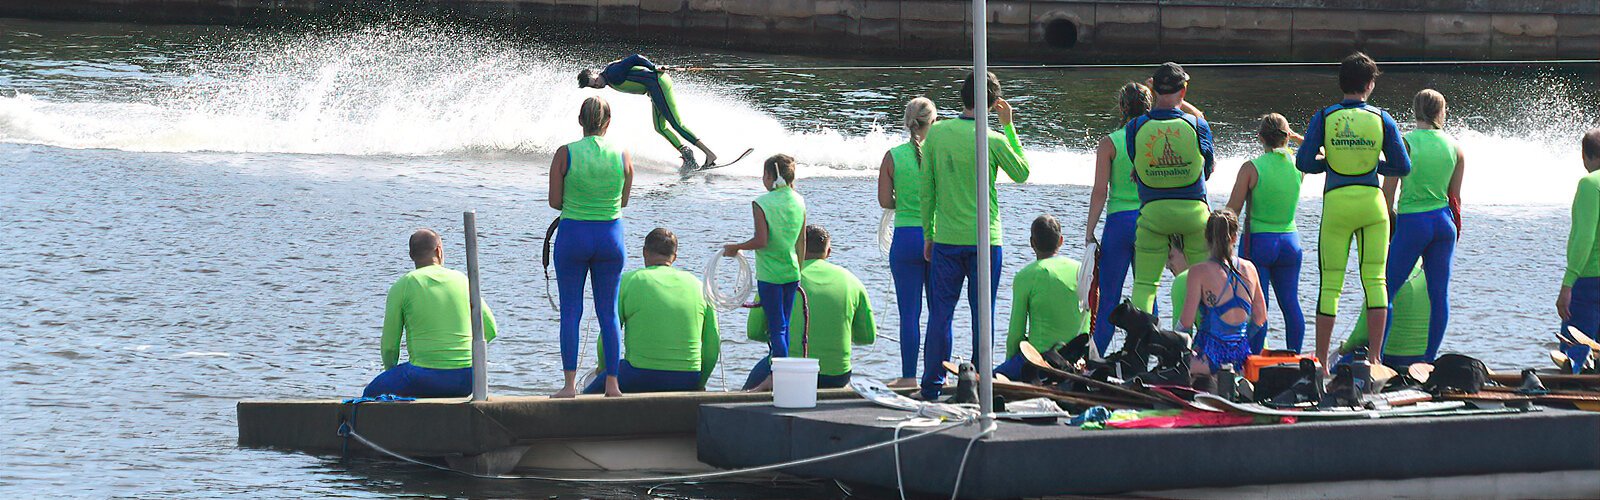 Members of the Tampa Bay Water Ski Show Team watch from the floating dock as they get ready for the next performance at the Tampa Riverfest festival.